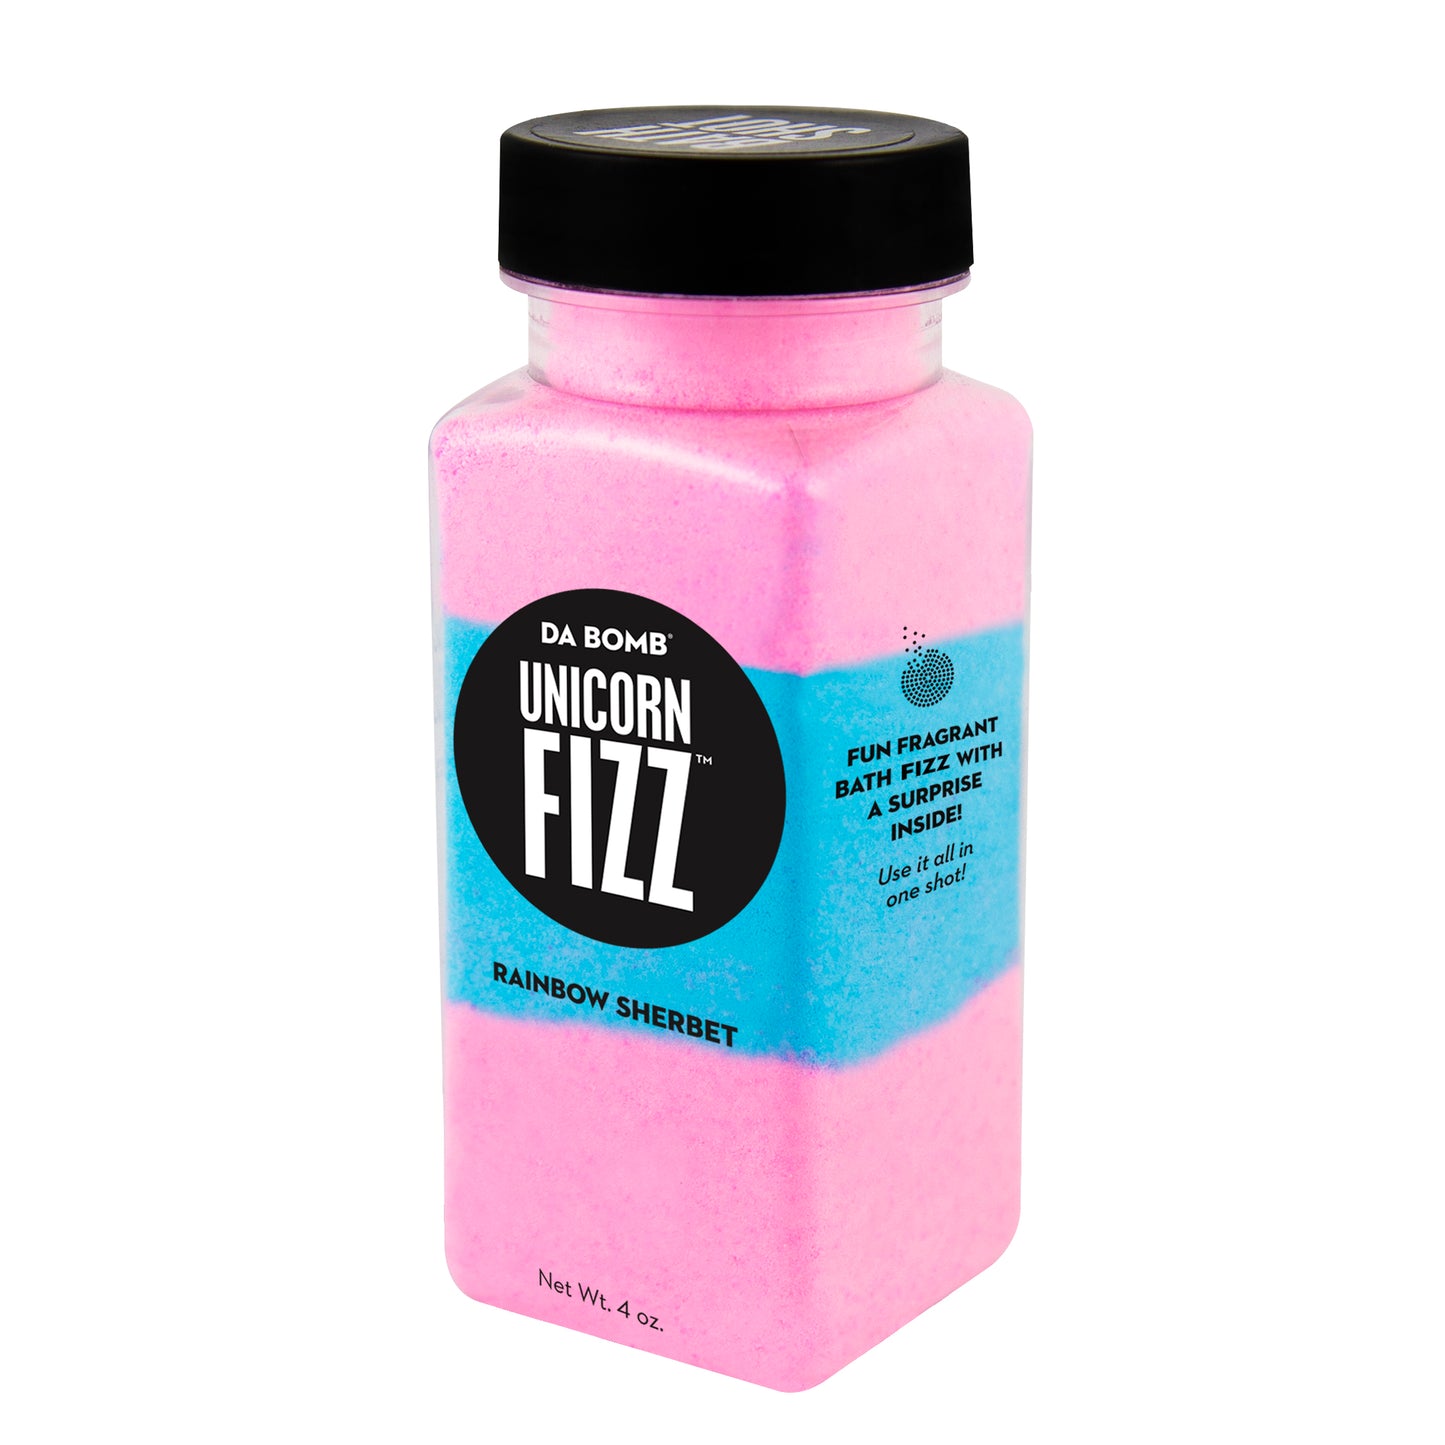 Small, clear plastic jar containing color block pink, bright blue and pink bath fizz that smells like rainbow sherbet. Contains a fun surprise.